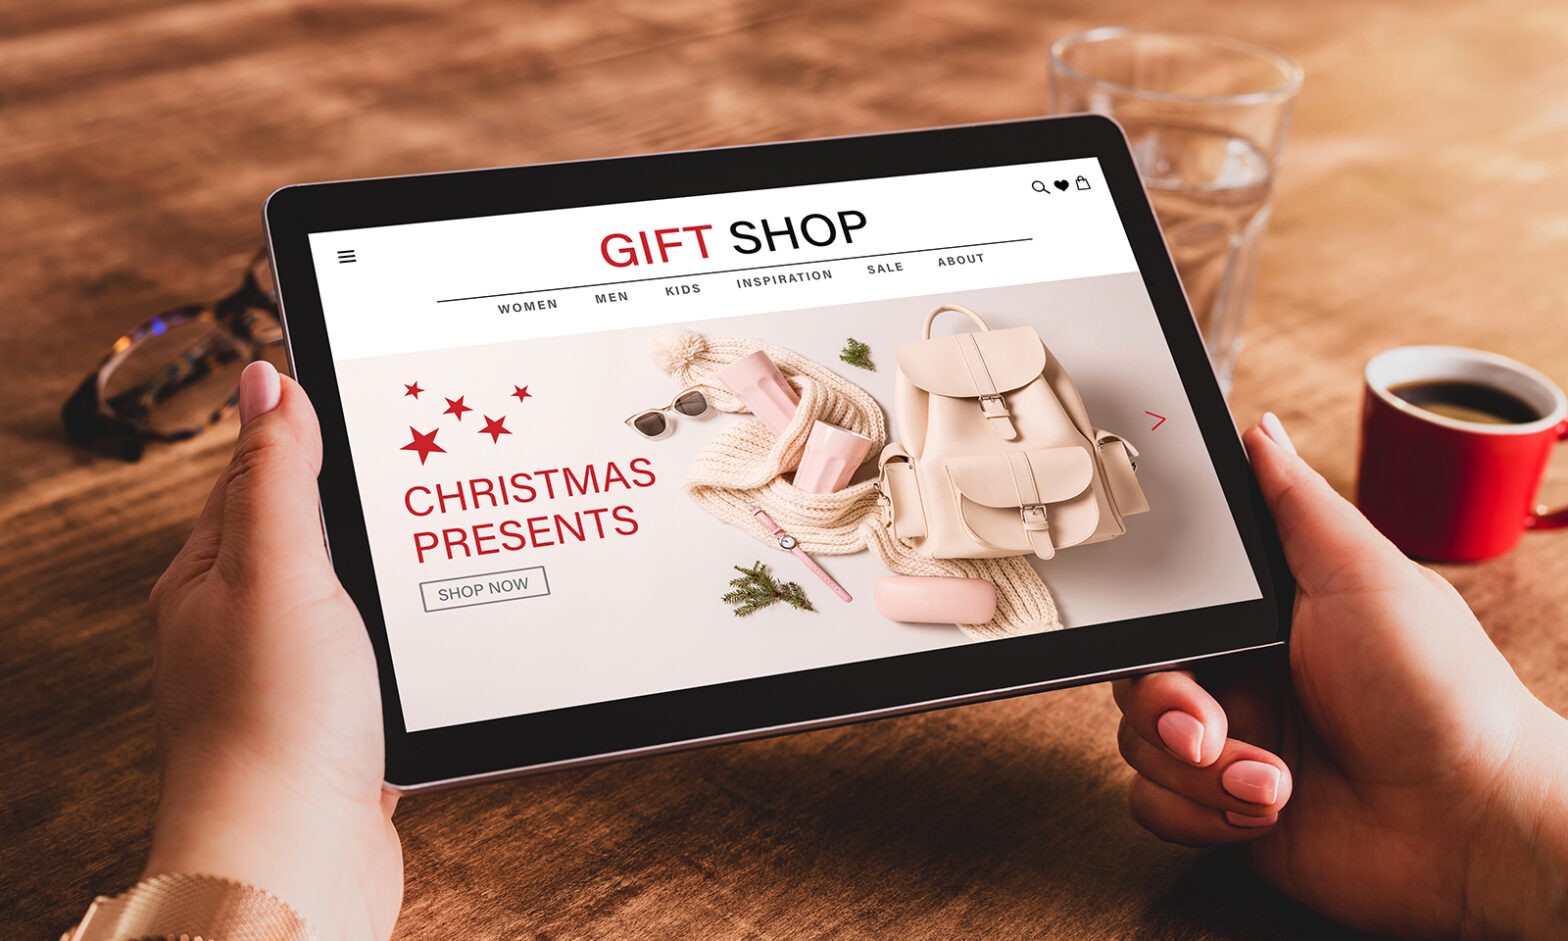 How to Leverage Paid Media for High-Performing Holiday Campaigns